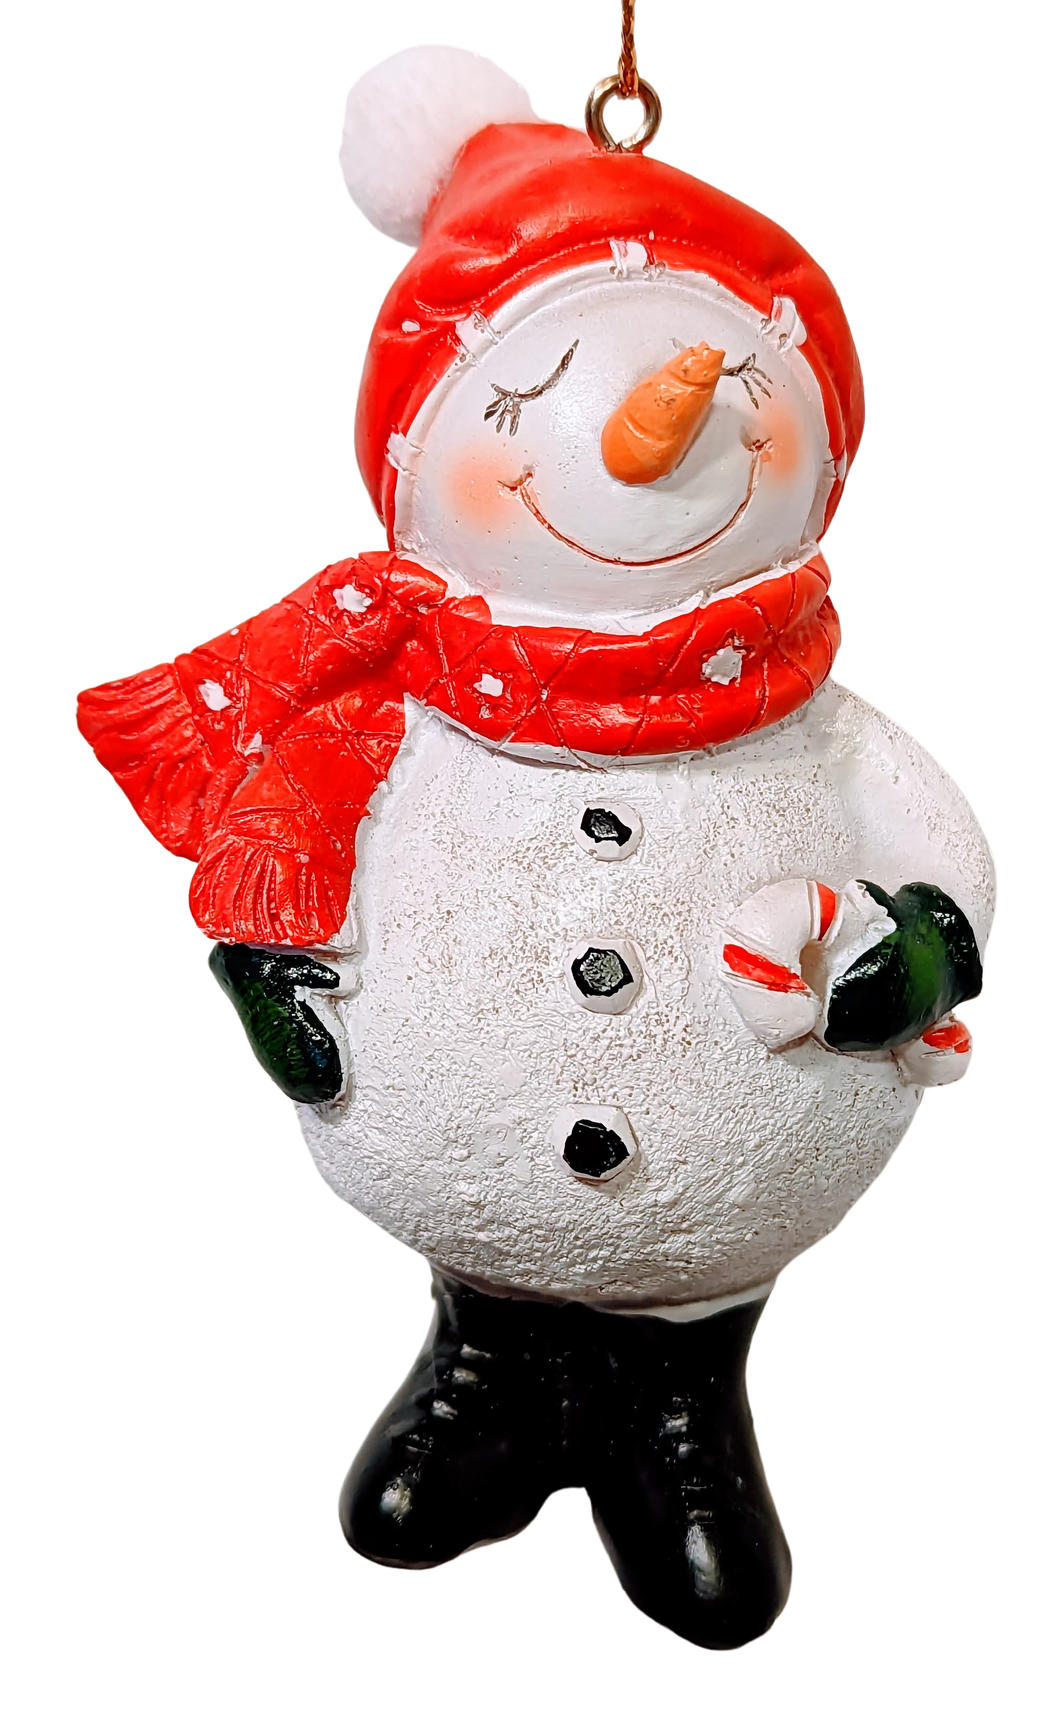 Snowman Ornament with Red Hat/Red Scarf Holding Candy Cane